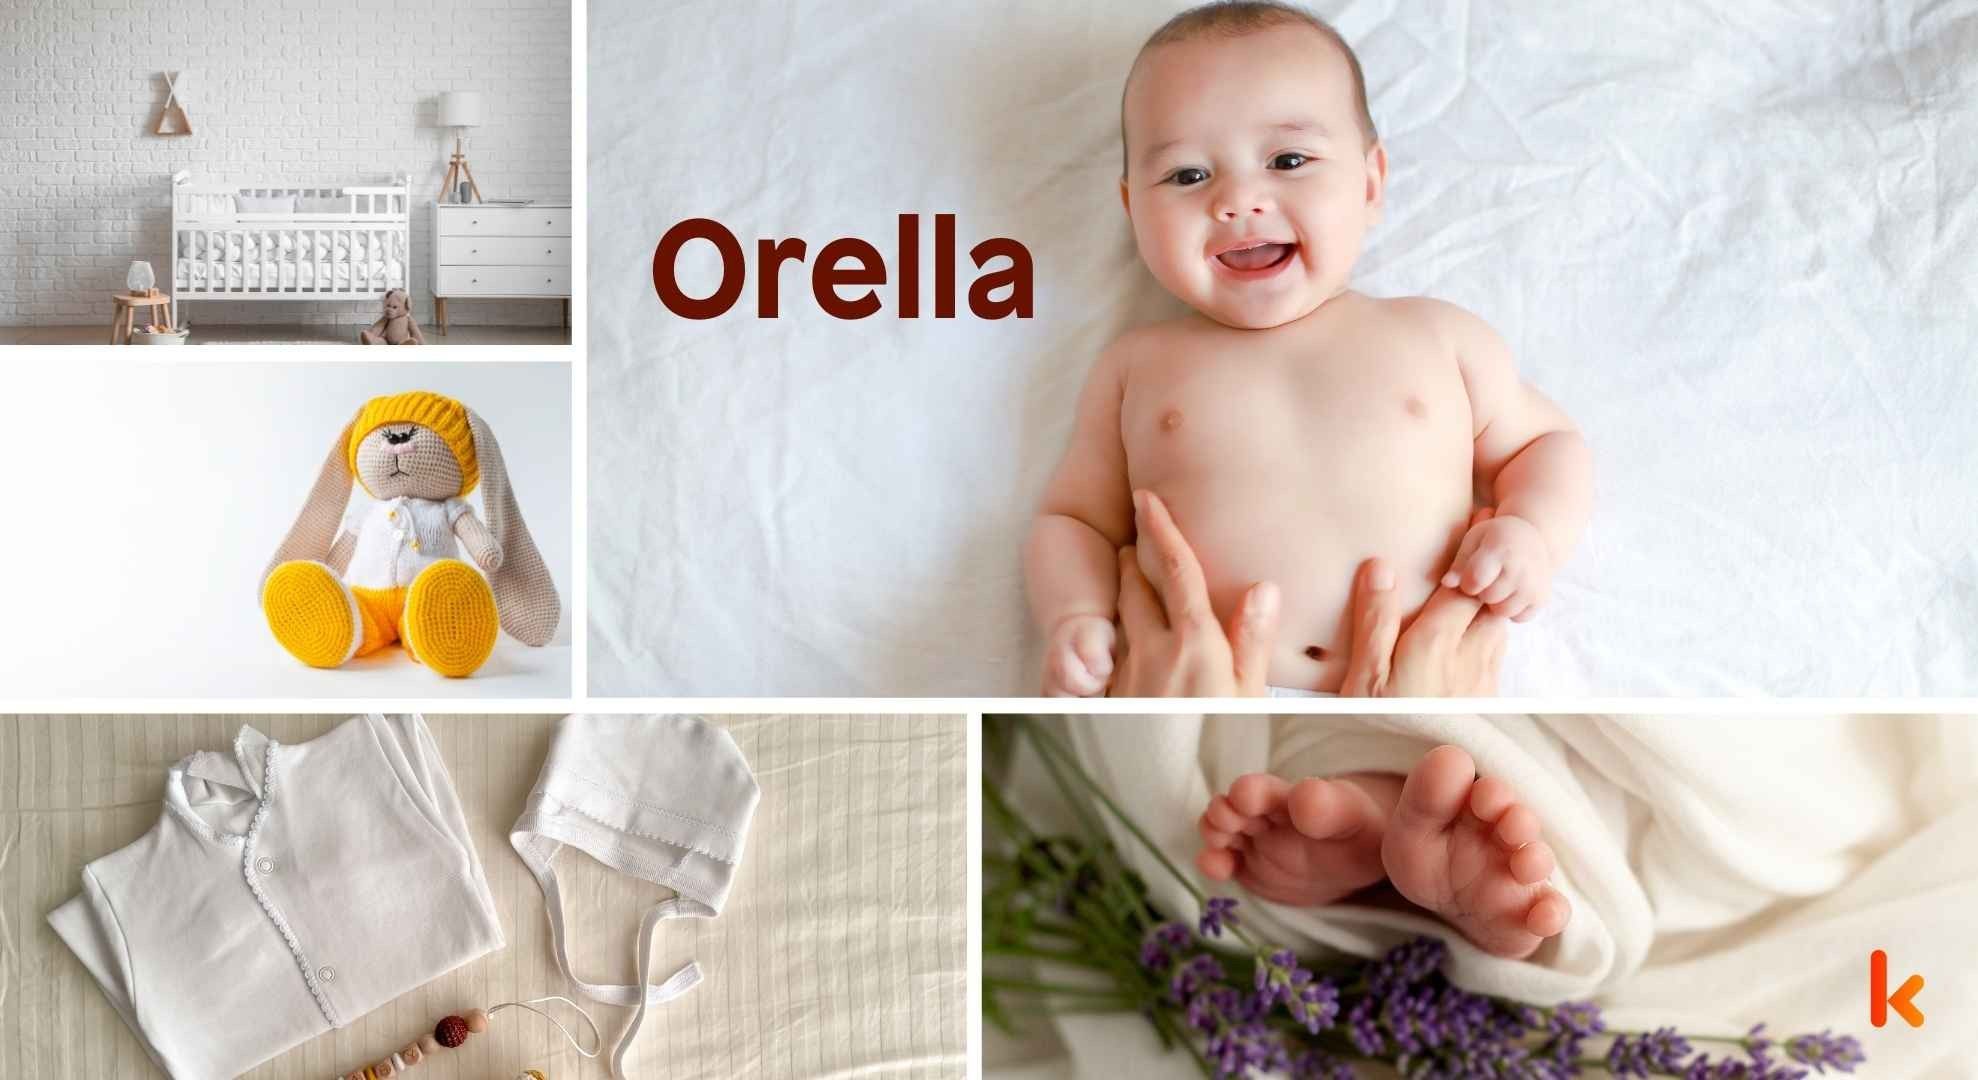 Meaning of the name Orella